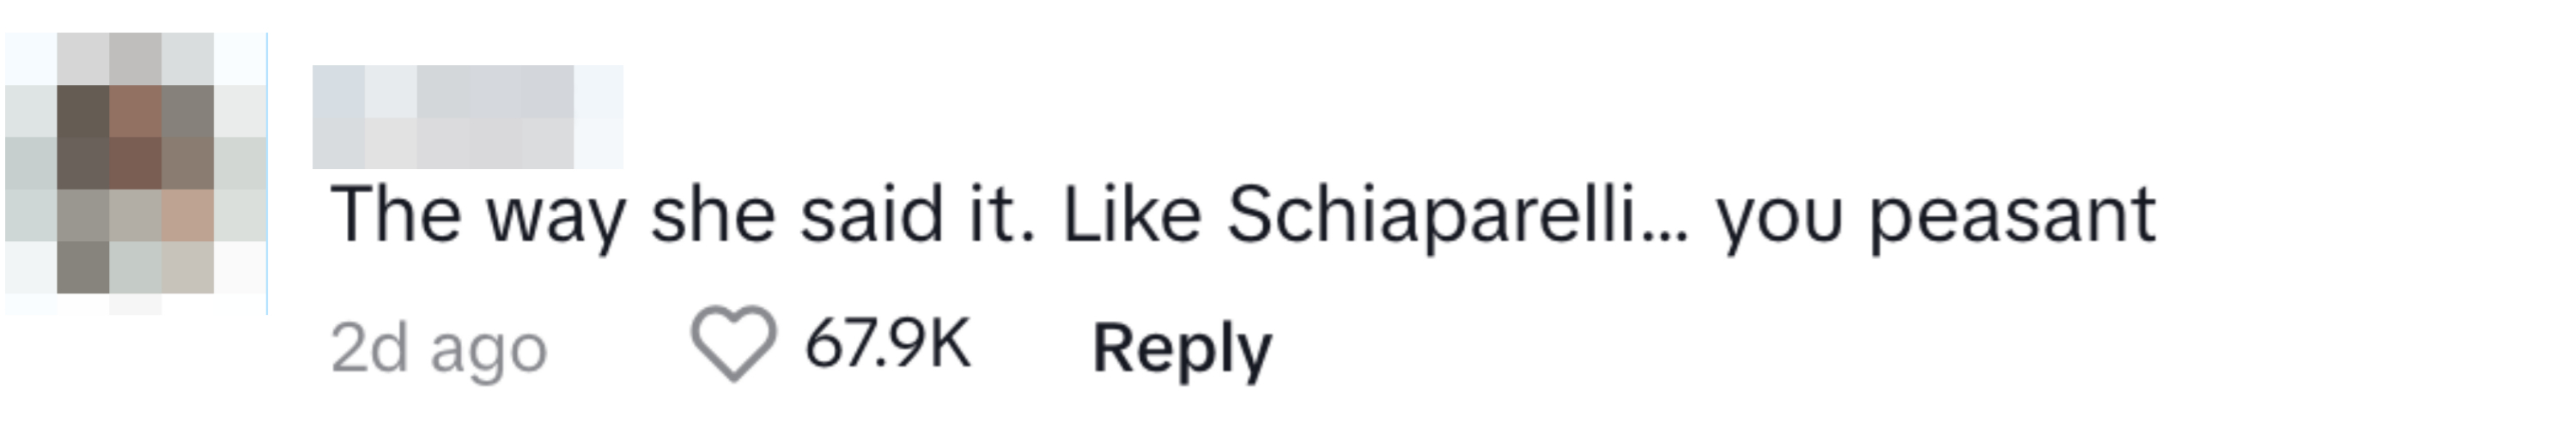 Comment on social media post: &quot;The way she said it. Like Schiaparelli, you peasant.&quot; 67.9K likes